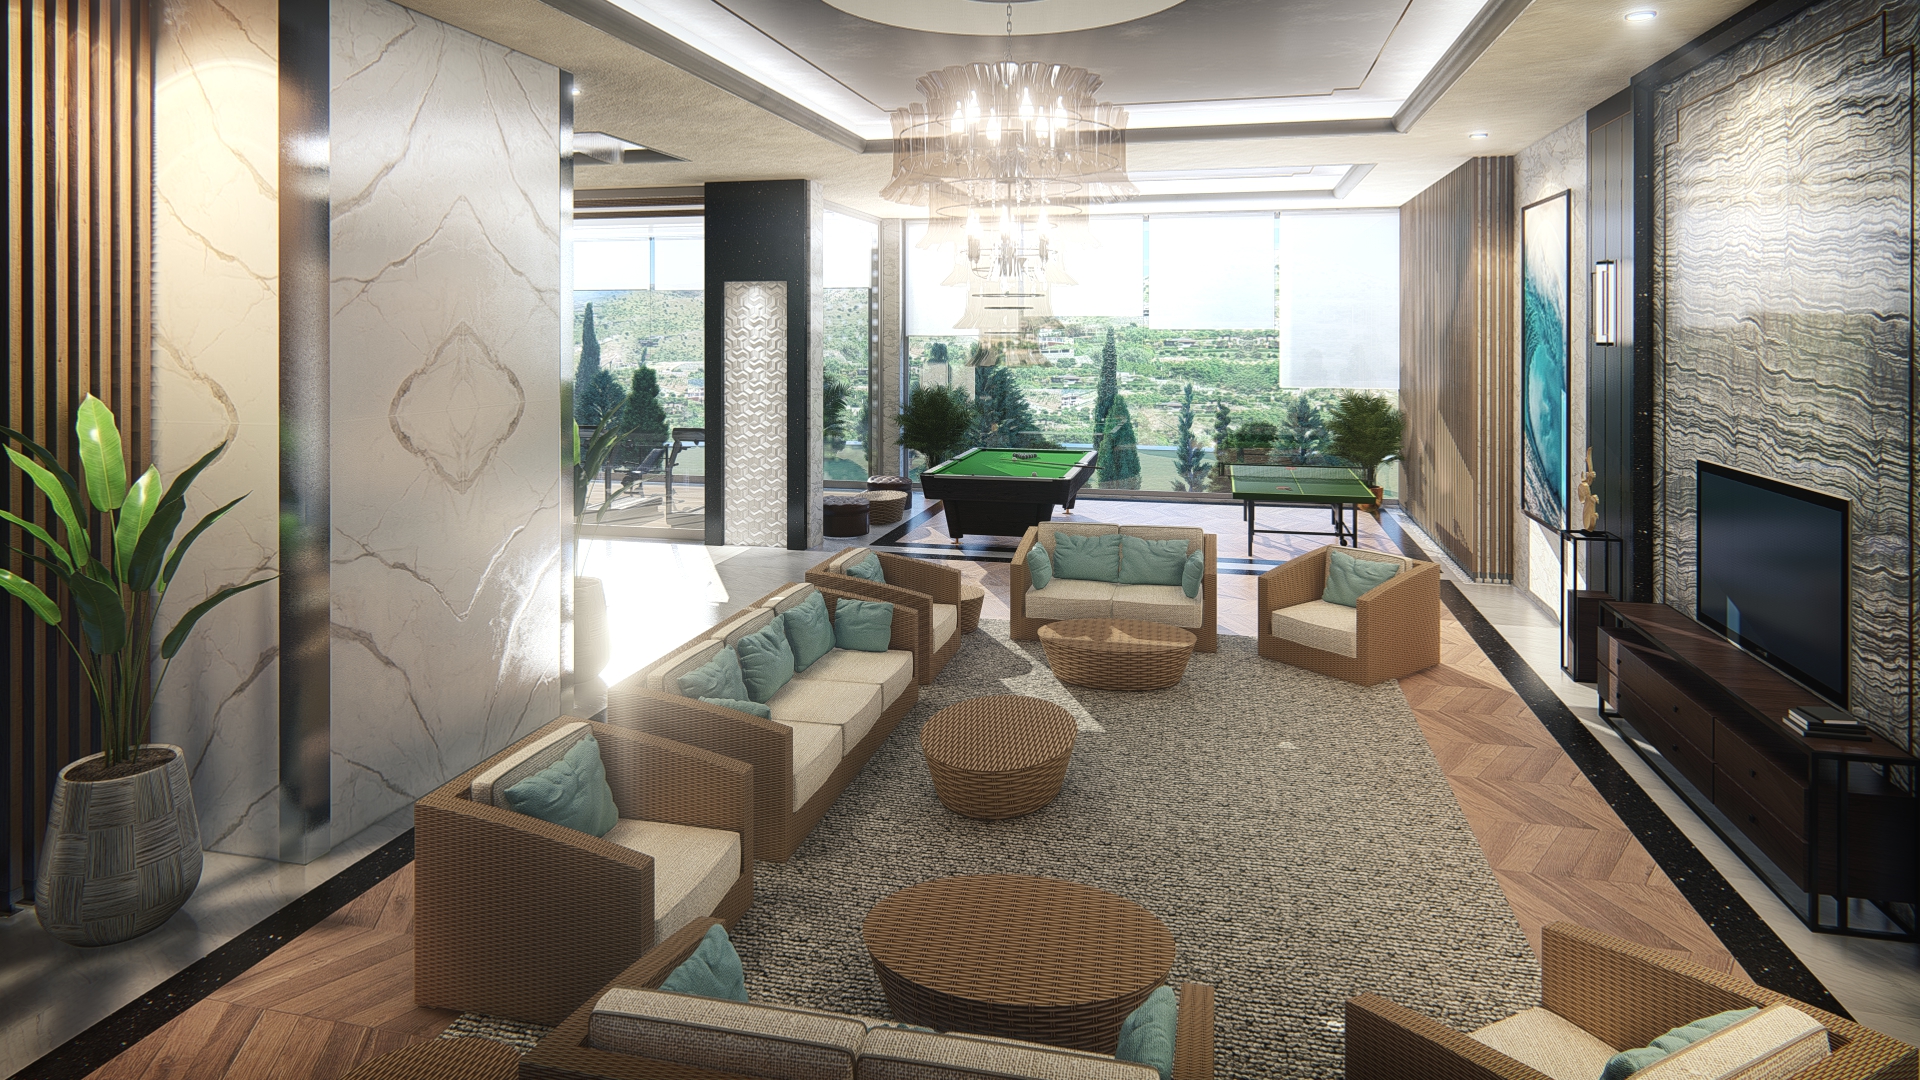 Interior design of a SPA space within a private villa in Iraq with an area of 540 m² in 2019